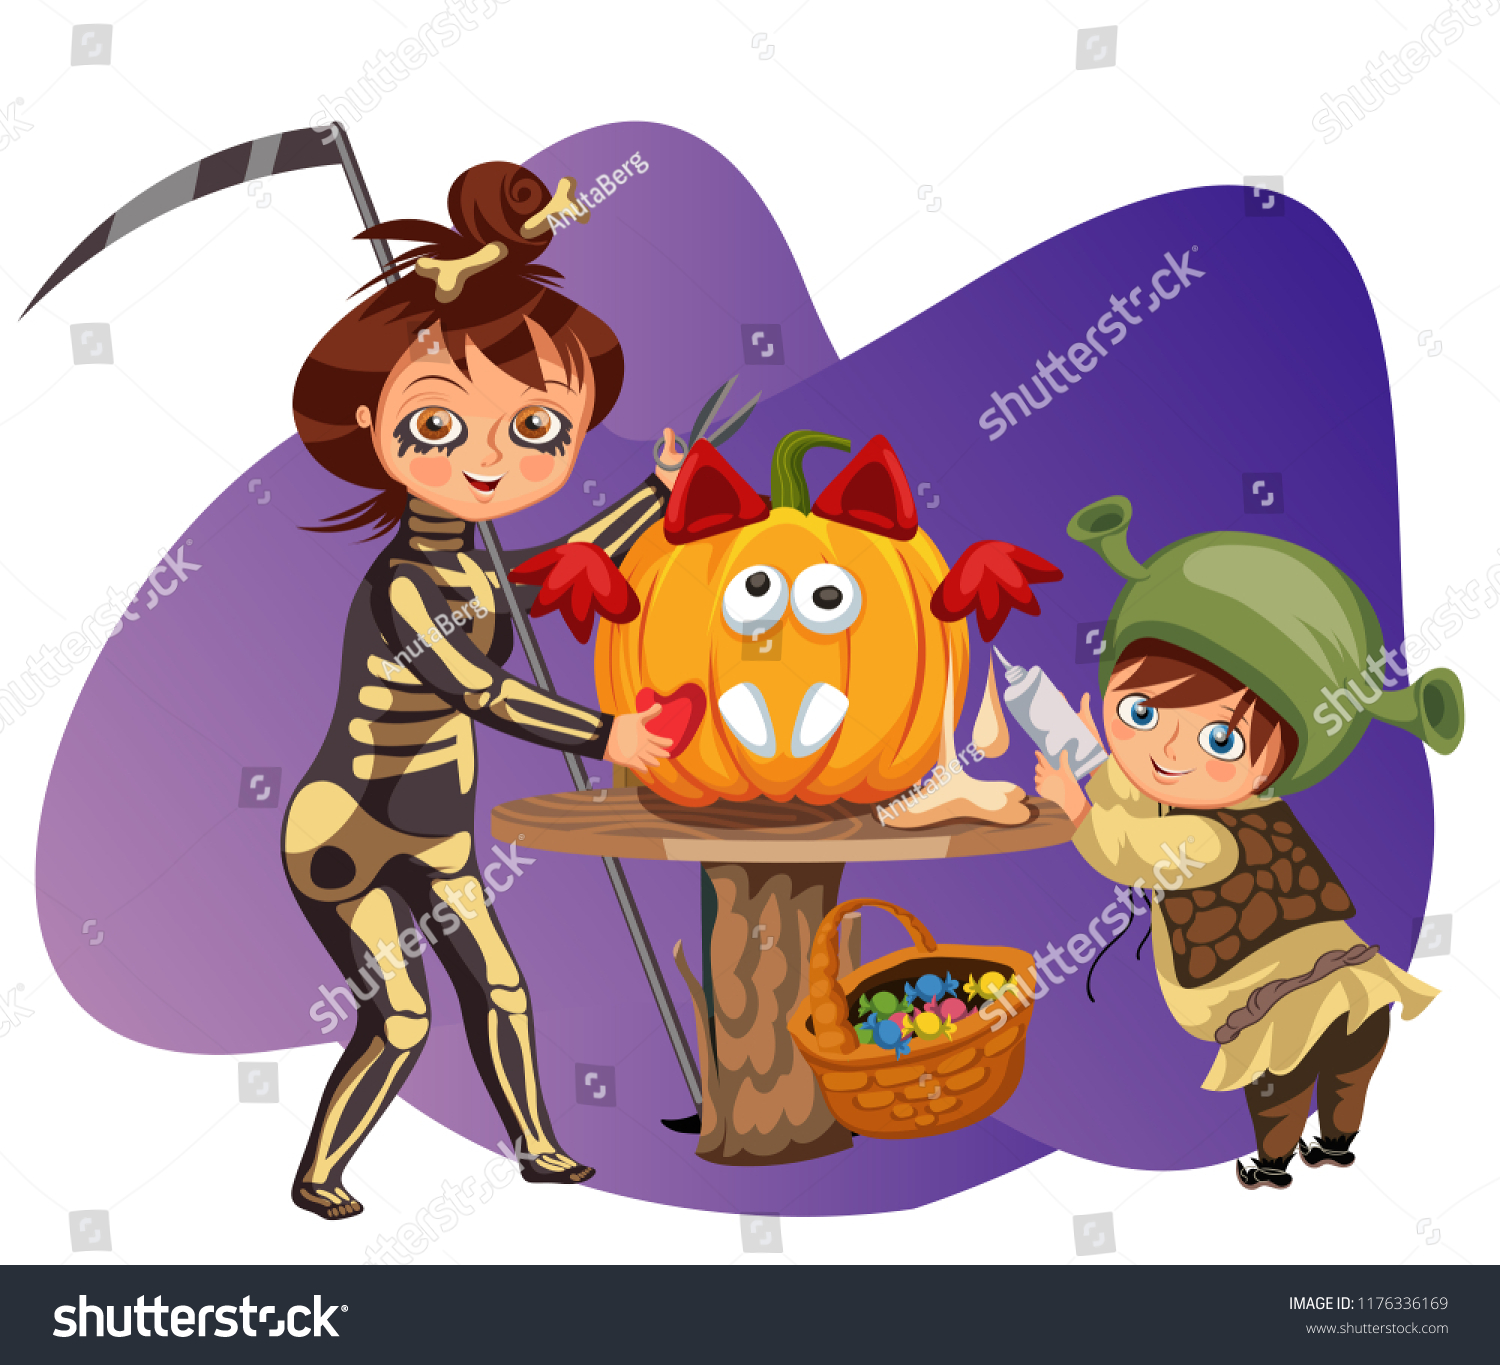 SVG of Mother with son carving Halloween pumpkin poster. Cartoon mom and little child dressed in hallows costumes of death and shrek making mystery gourd for All Saints Eve vector illustration. svg